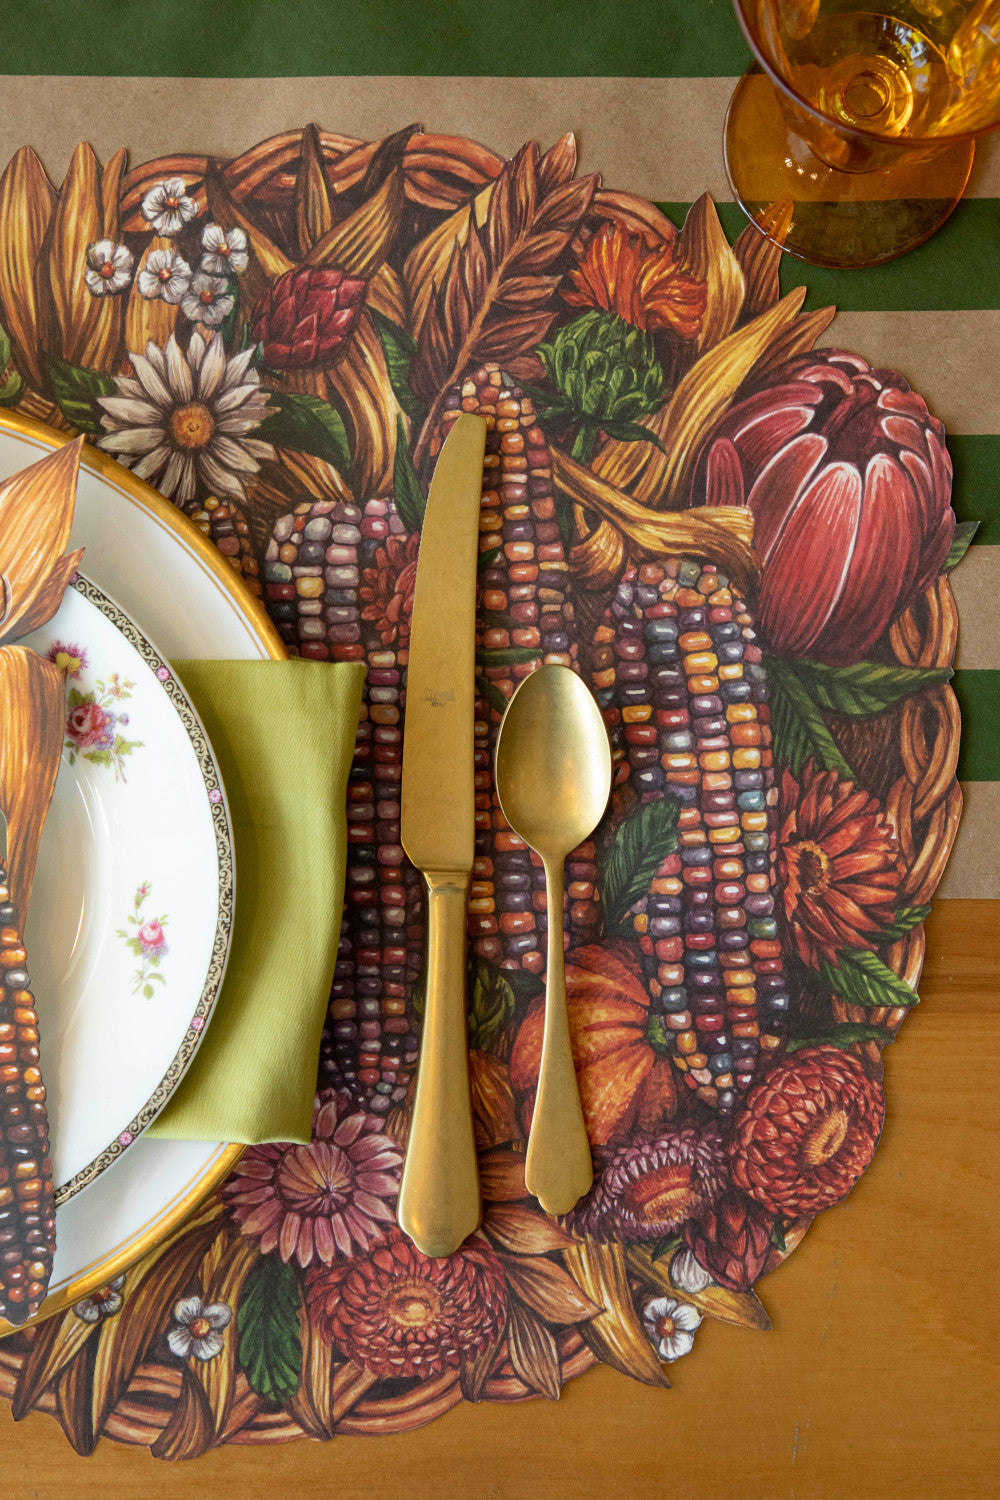 The Die-cut Gathering Basket Placemat under an elegant fall-themed place setting, from above.